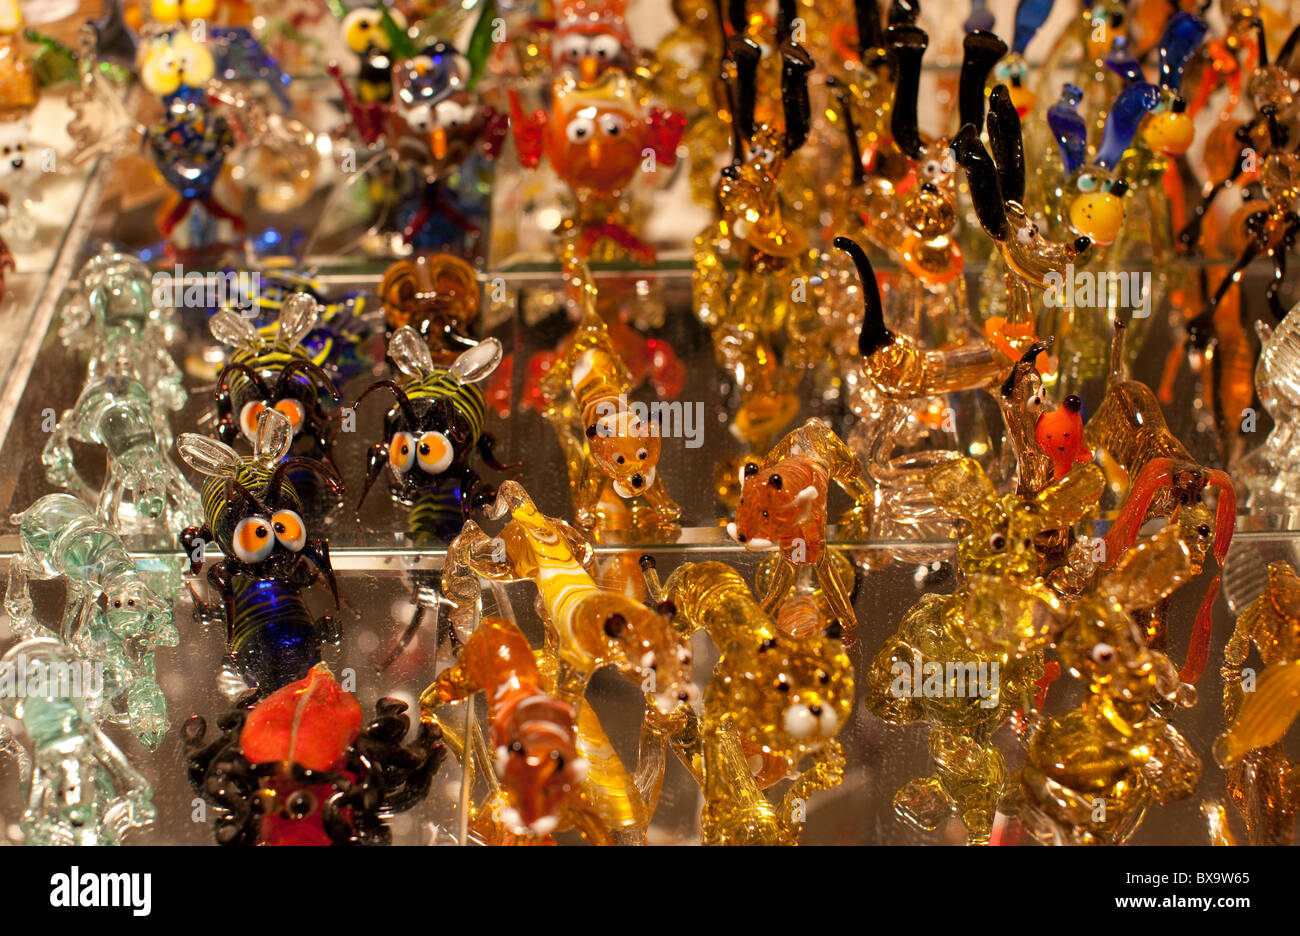 Glass animals at German Christmas market in London Stock Photo